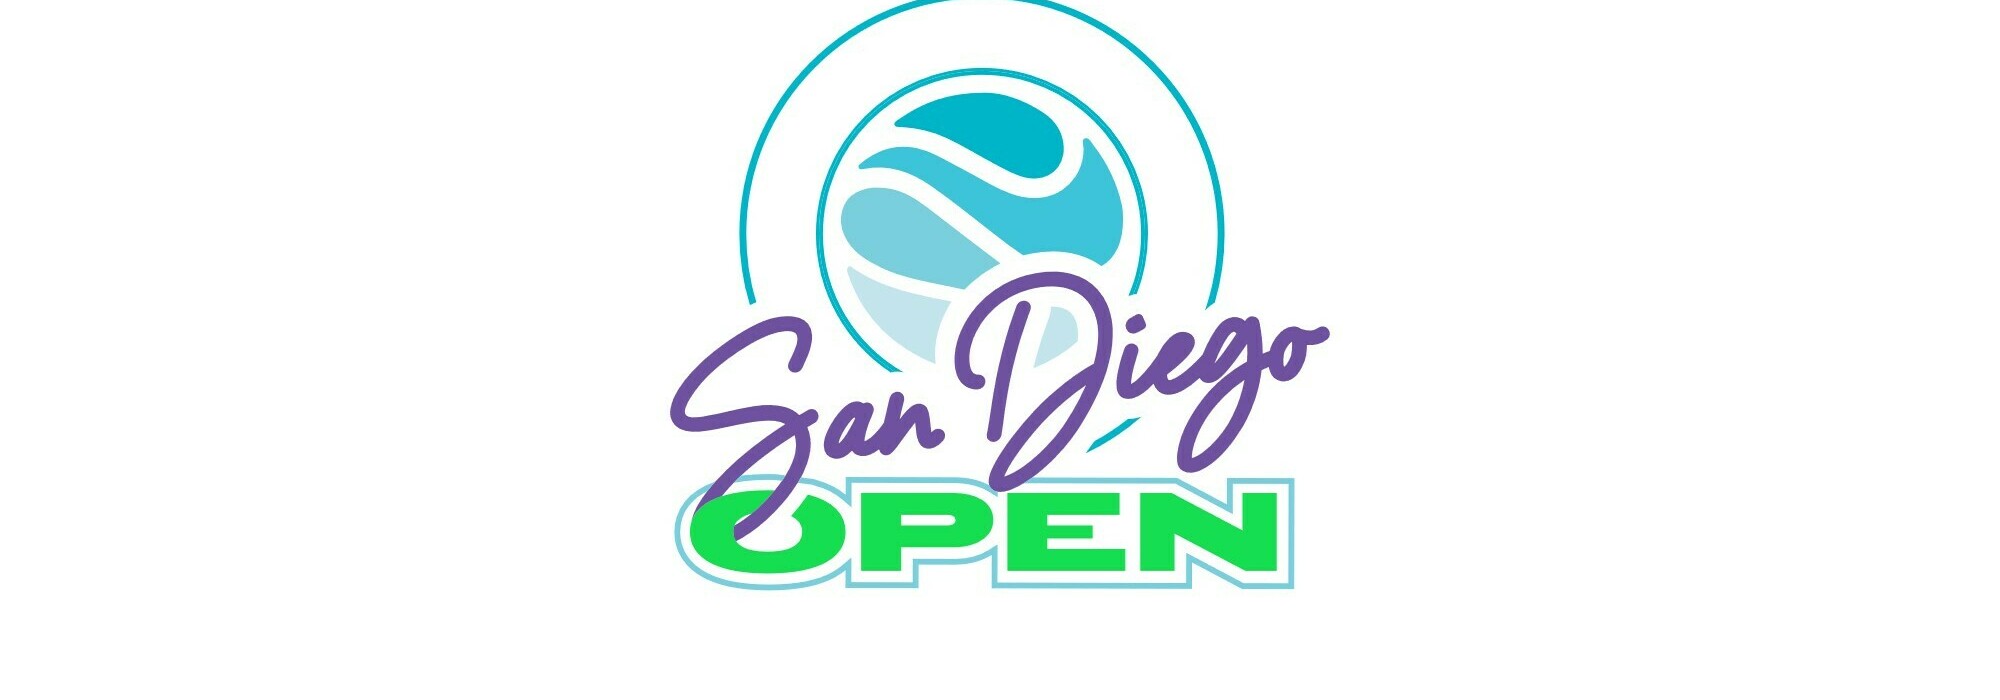 A San Diego Open - WTA (Women's) live event